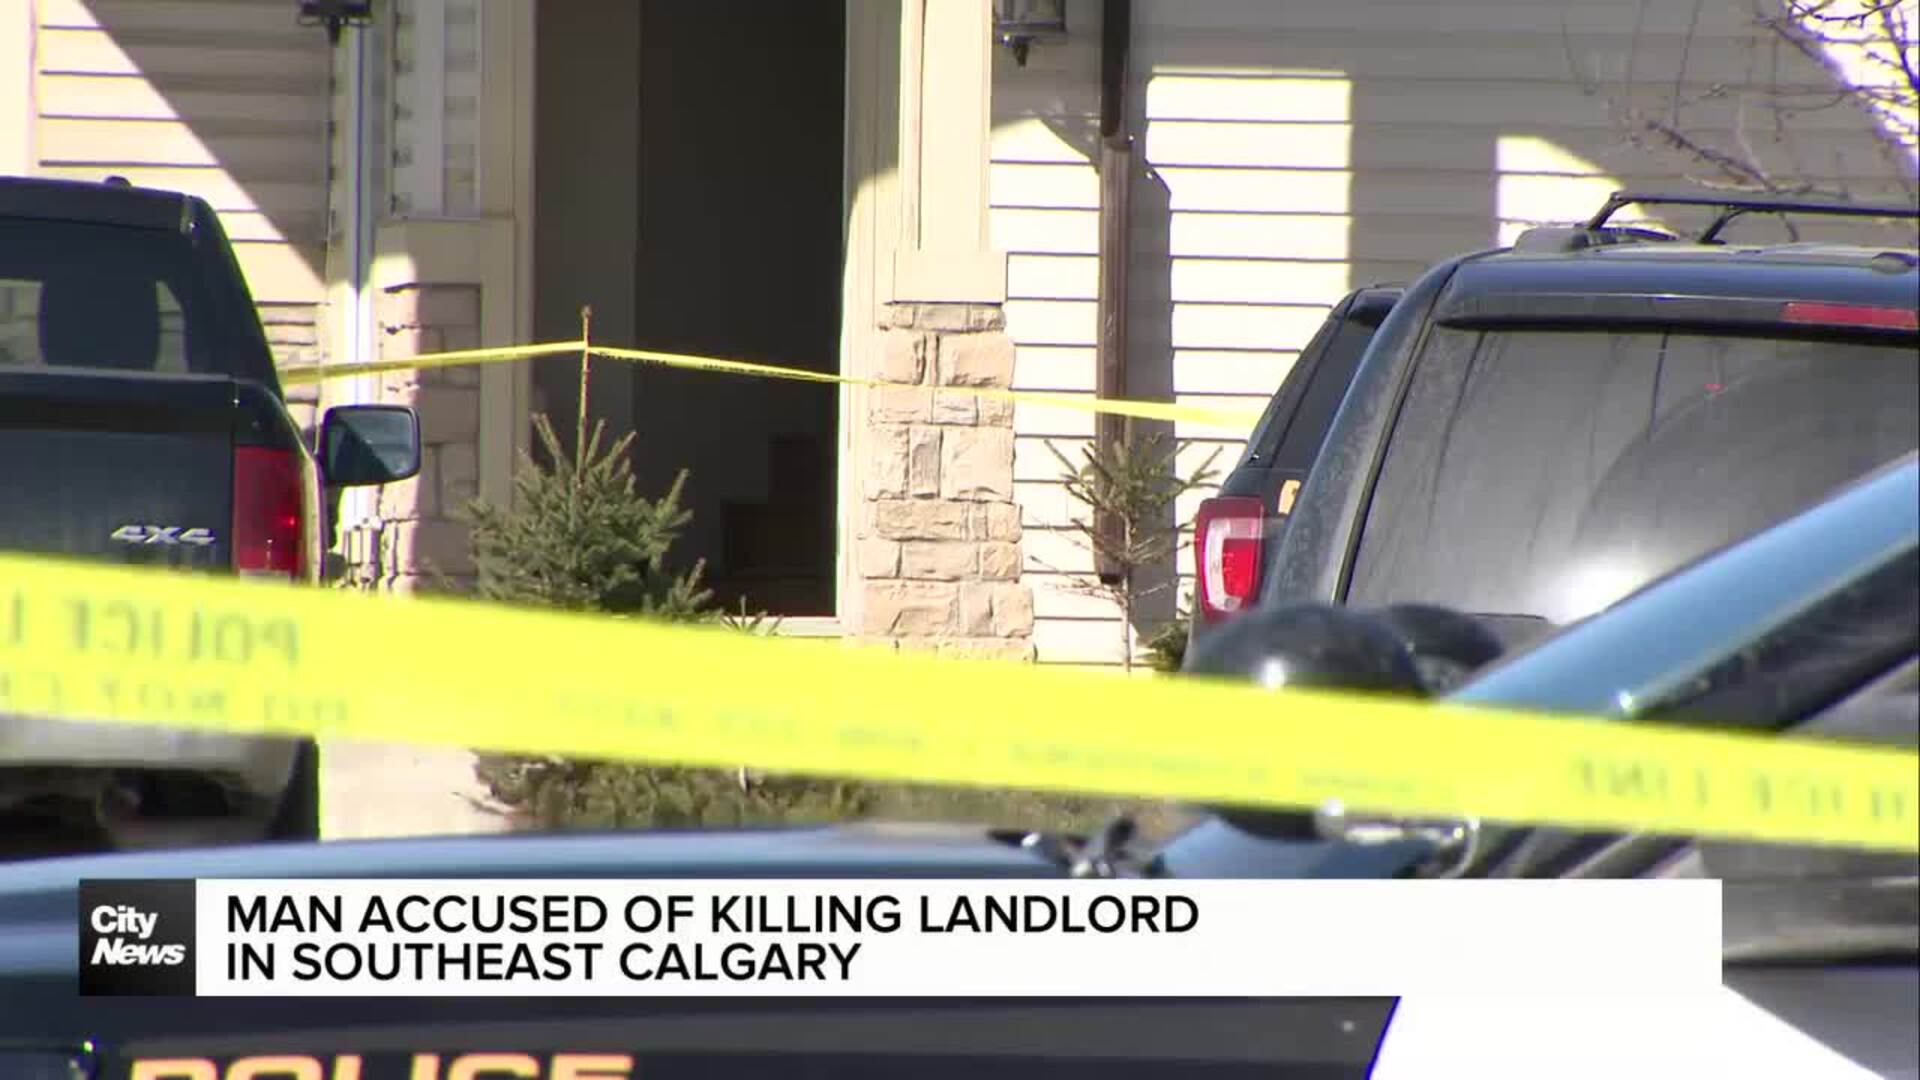 Man accused of killing landlord in southeast Calgary